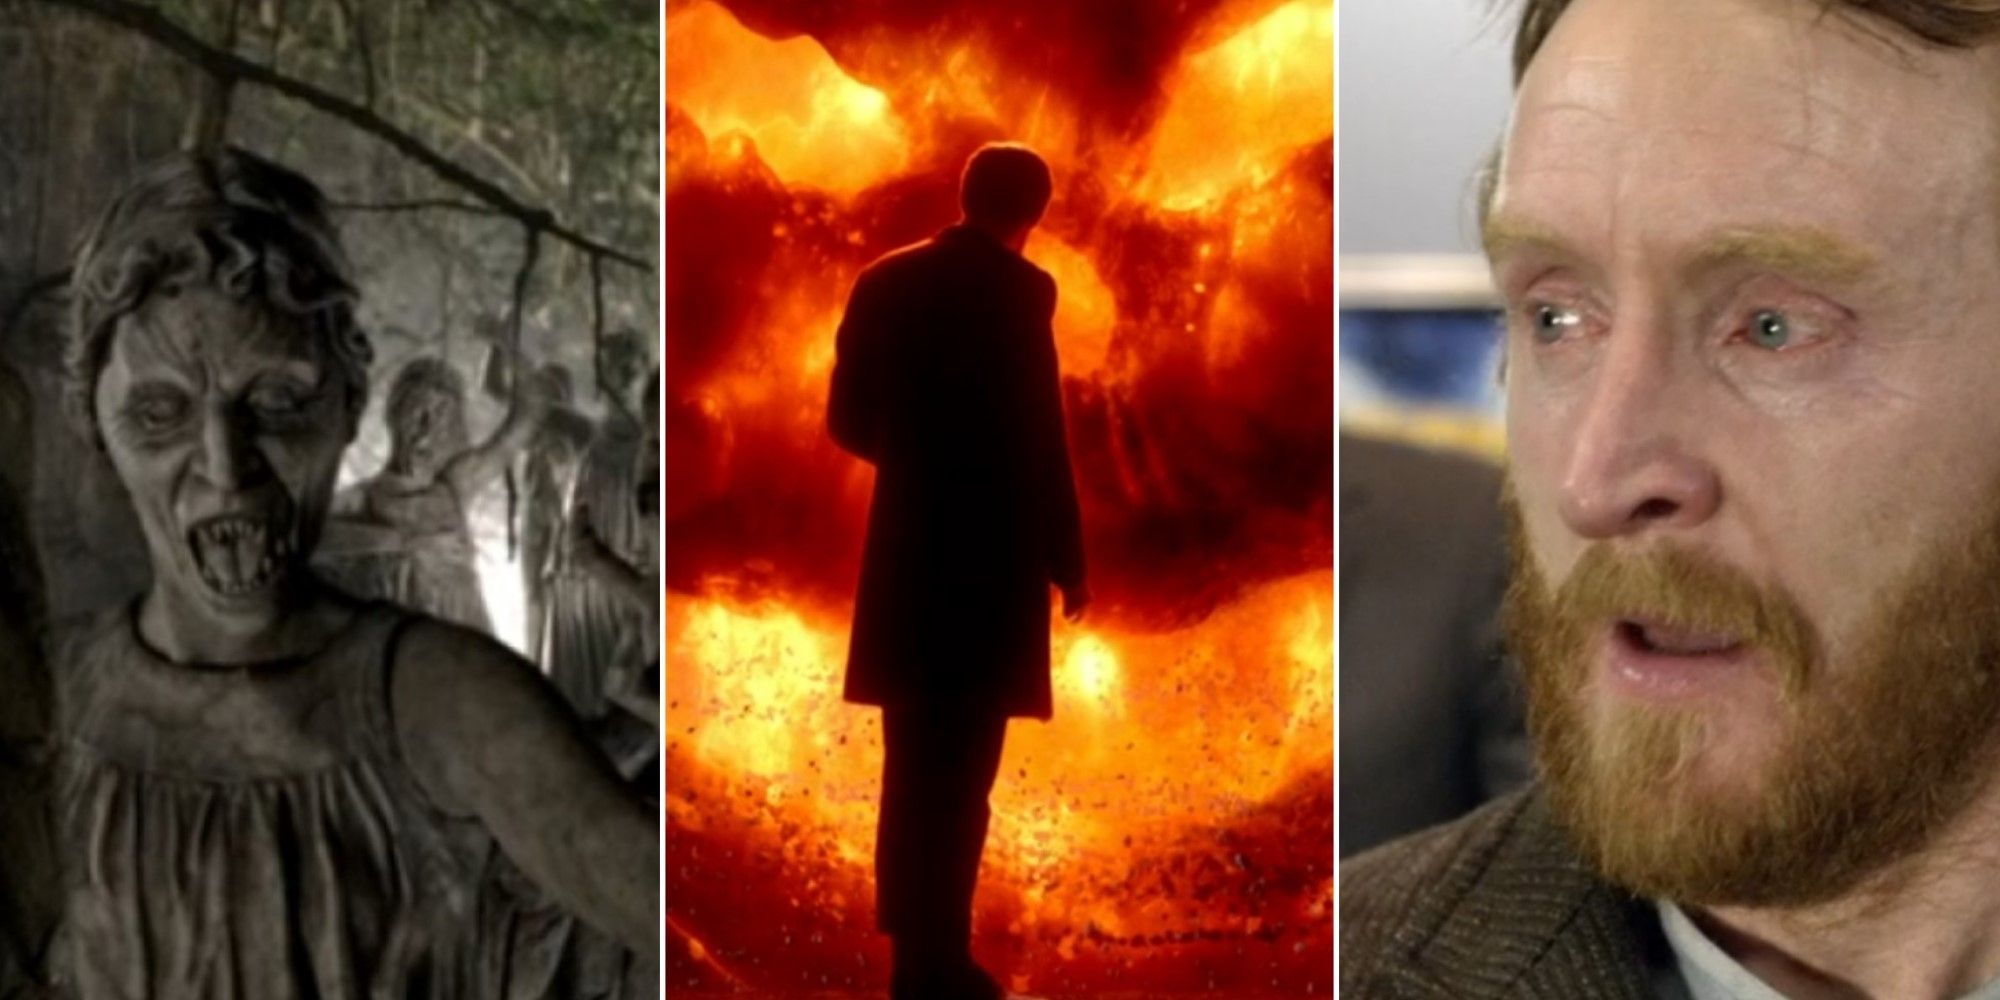 Images from three different Doctor Who episodes featuring The Eleventh Doctor